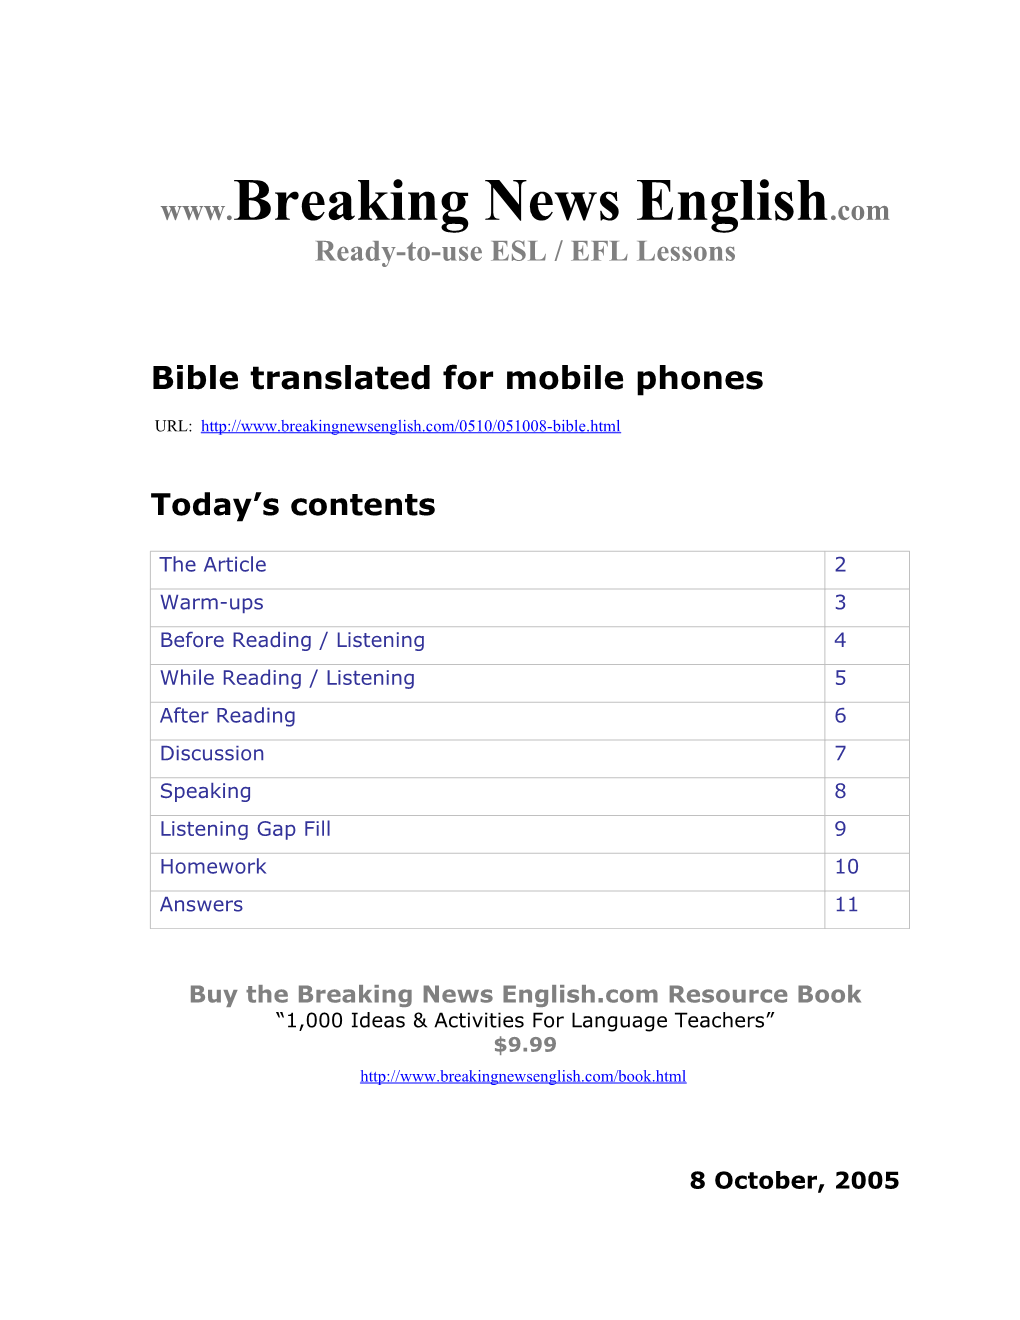 Bible Translated for Mobile Phones